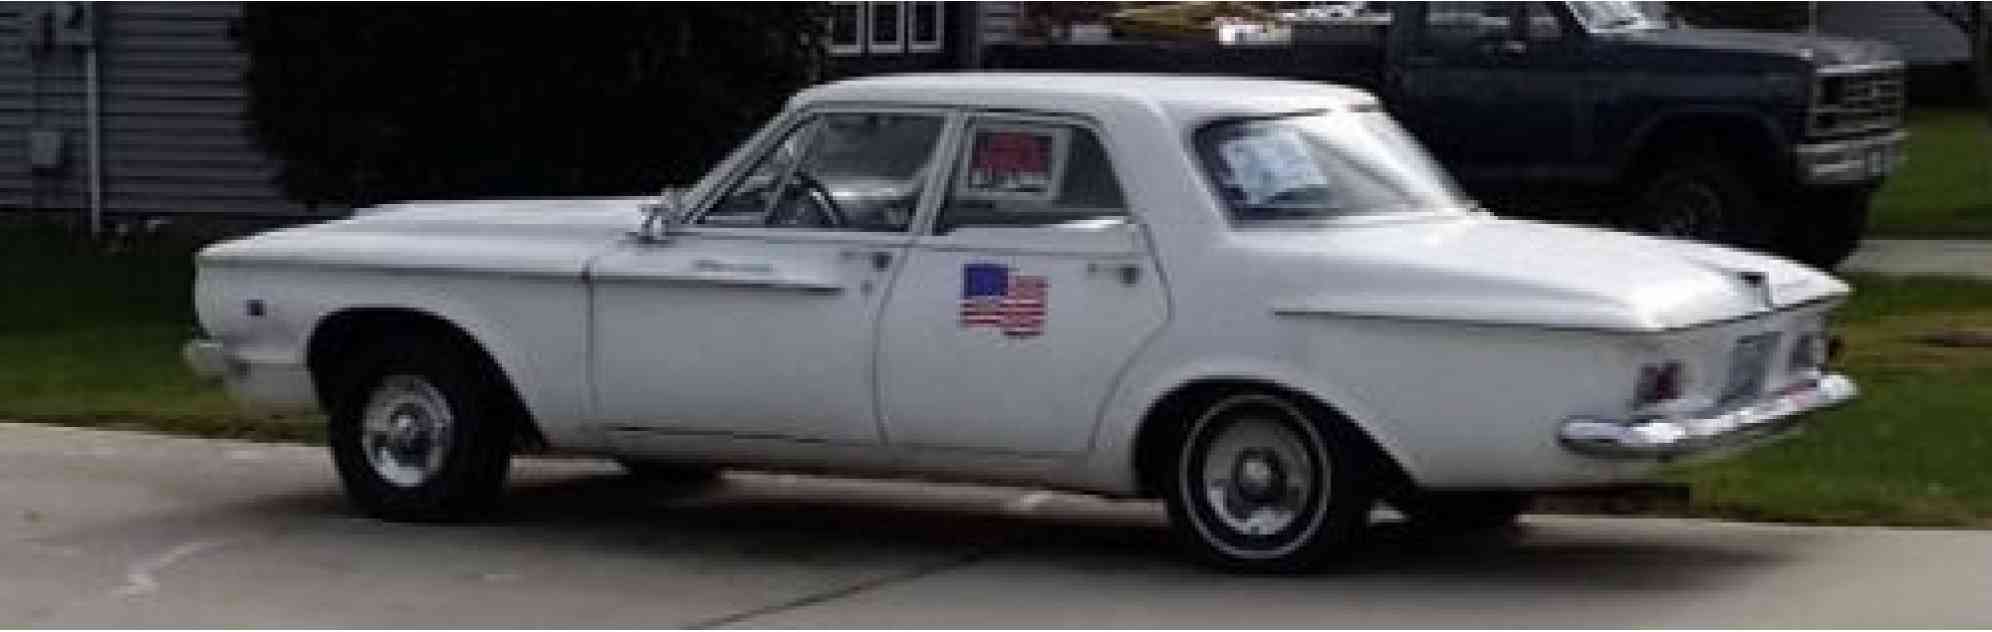 1962 Plymouth Other Savoy